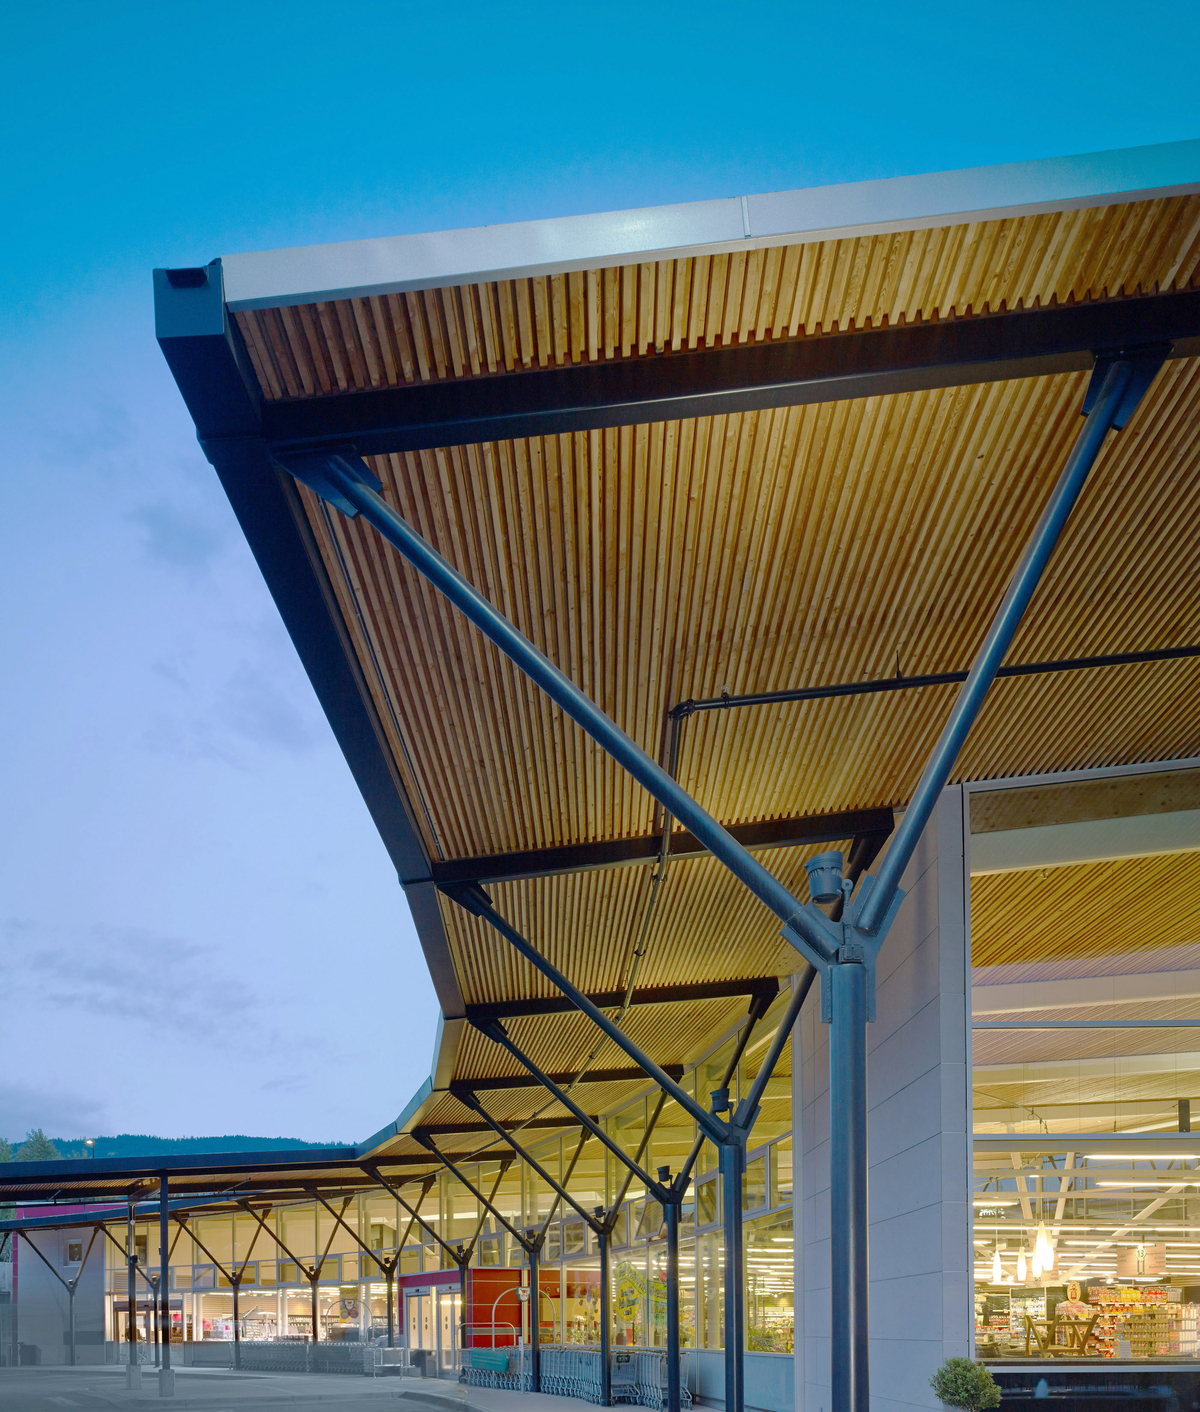 Exterior early evening view of Askews Supermarket front showing covered hybrid walkway of nail-laminated timber (NLT) and steel running along two storey low rise glass fronted store